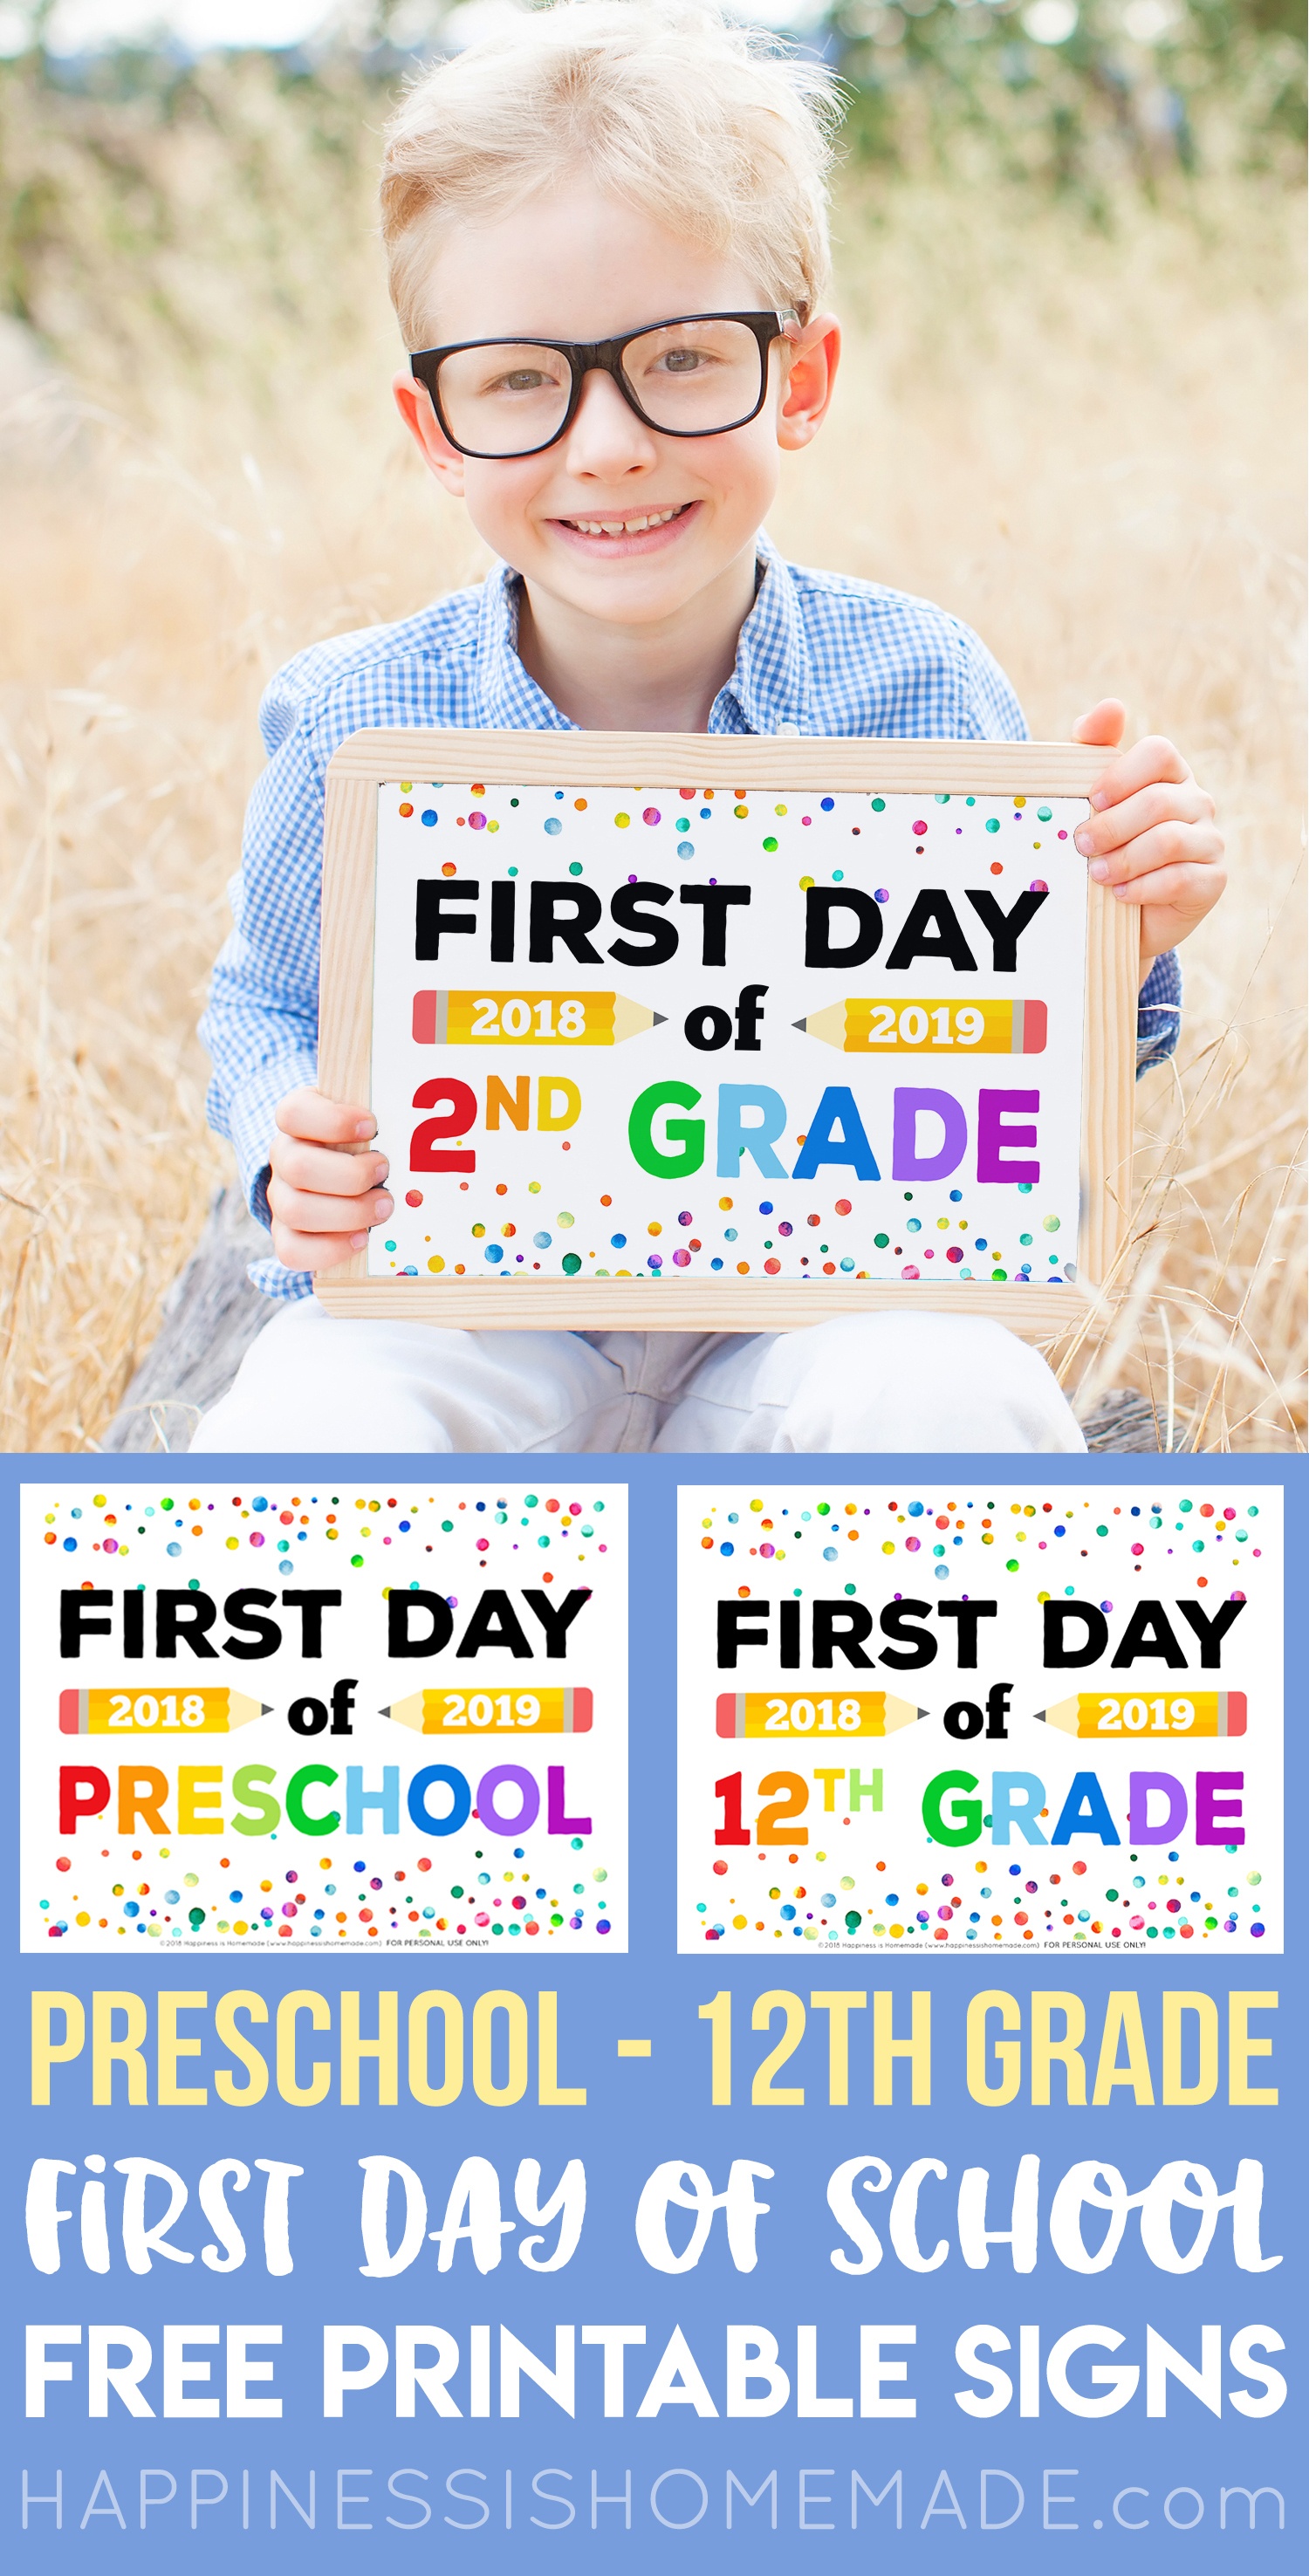 First Day Of School Signs - Free Printables - Happiness Is Homemade - Free Printable Back To School